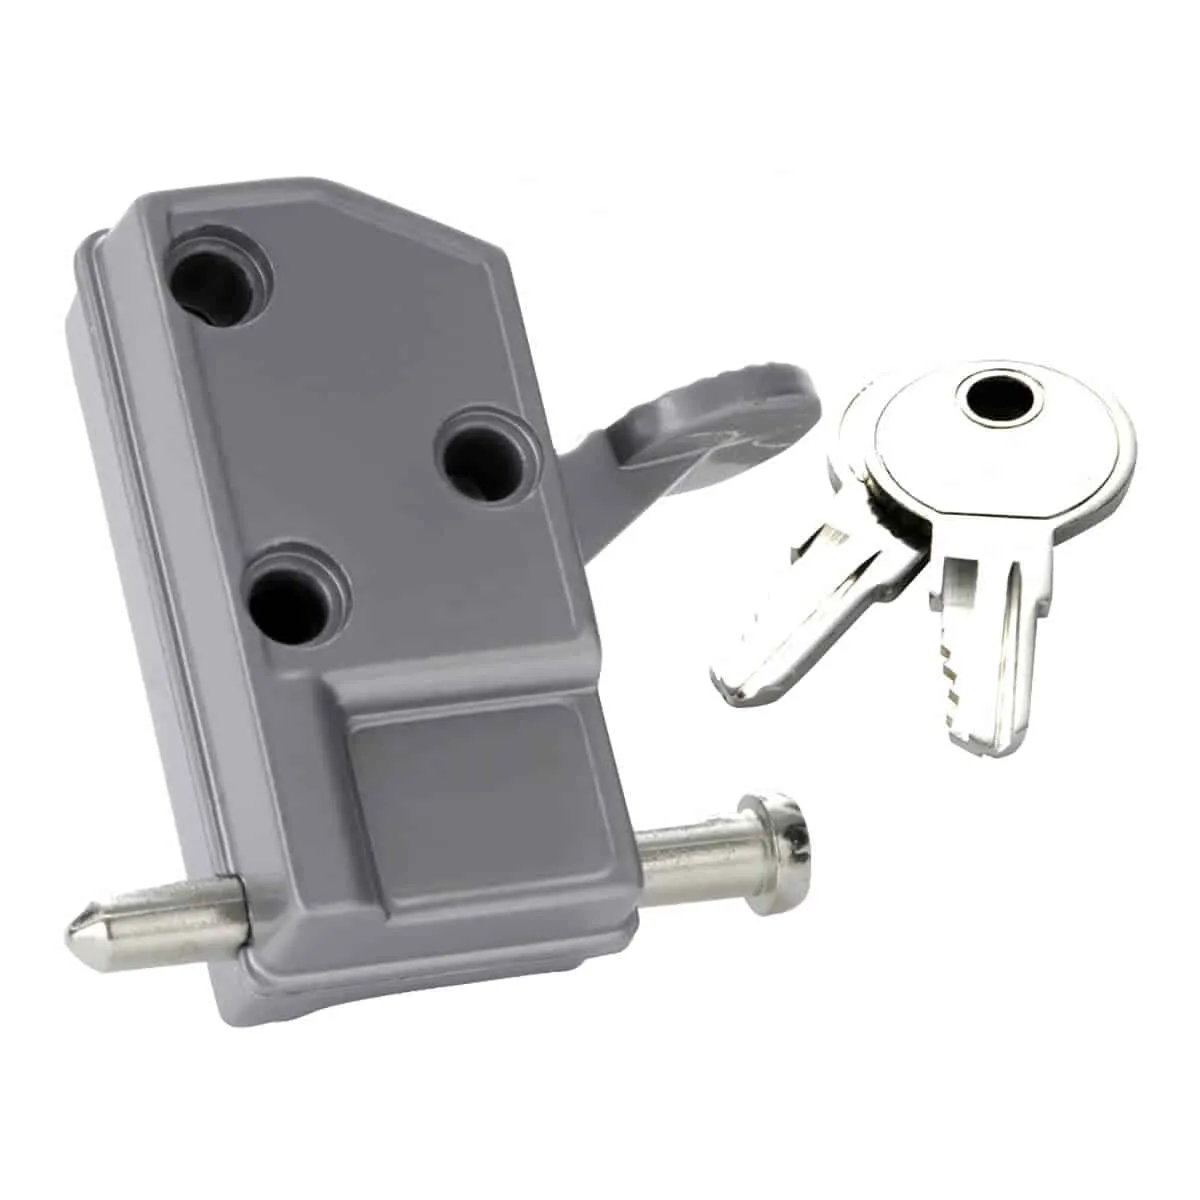 patio door locks with keys that can replace a traditional padlock